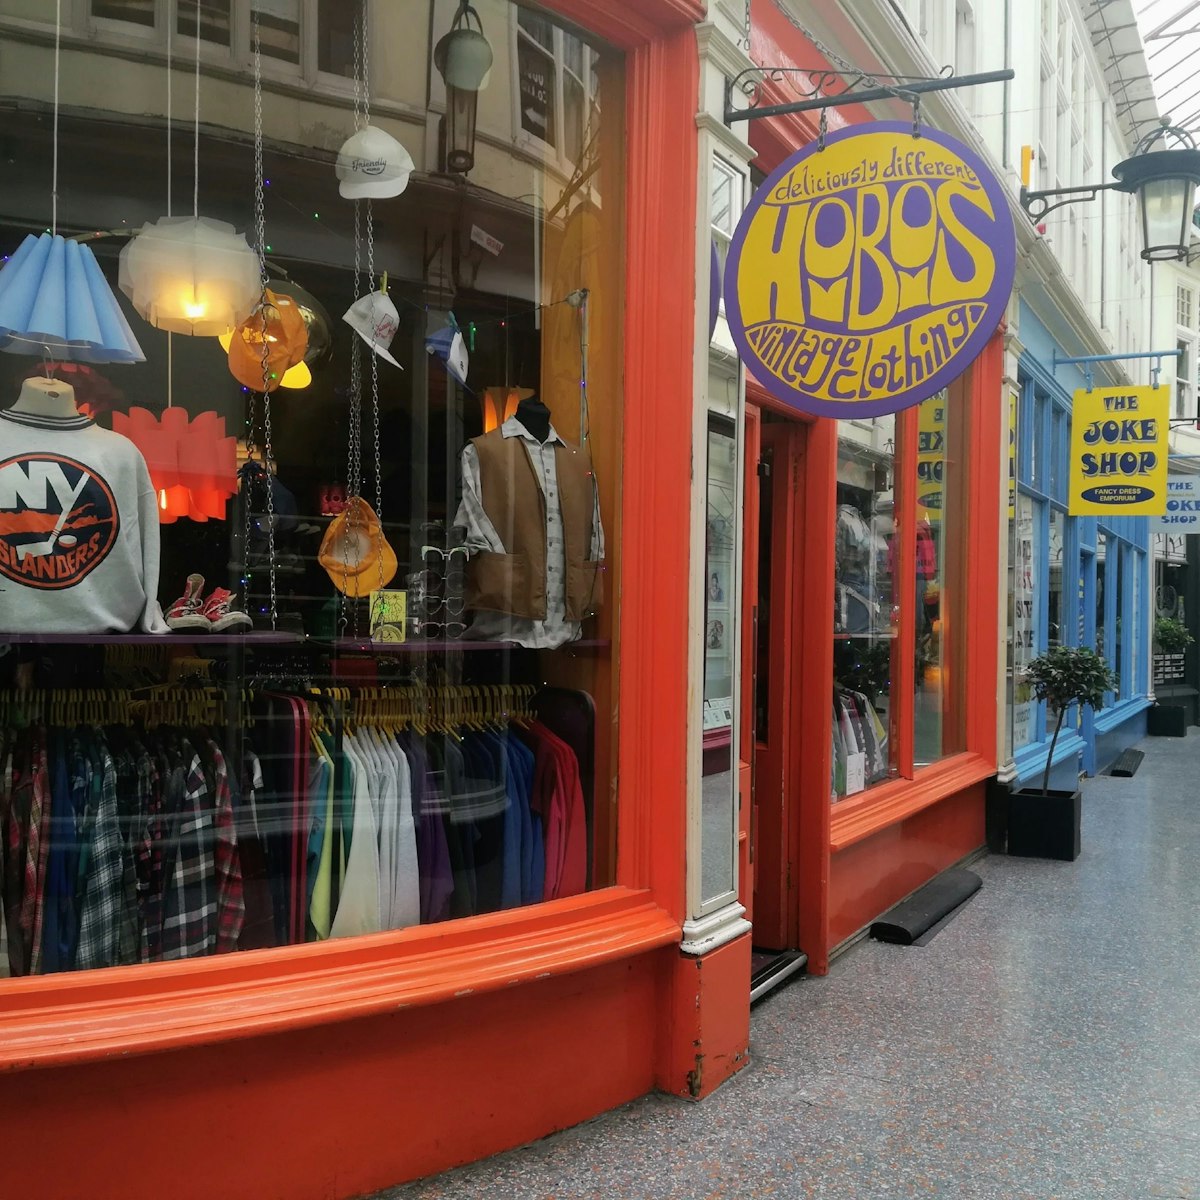 Outside the shop, which sits in one of the arcades, Hobo's